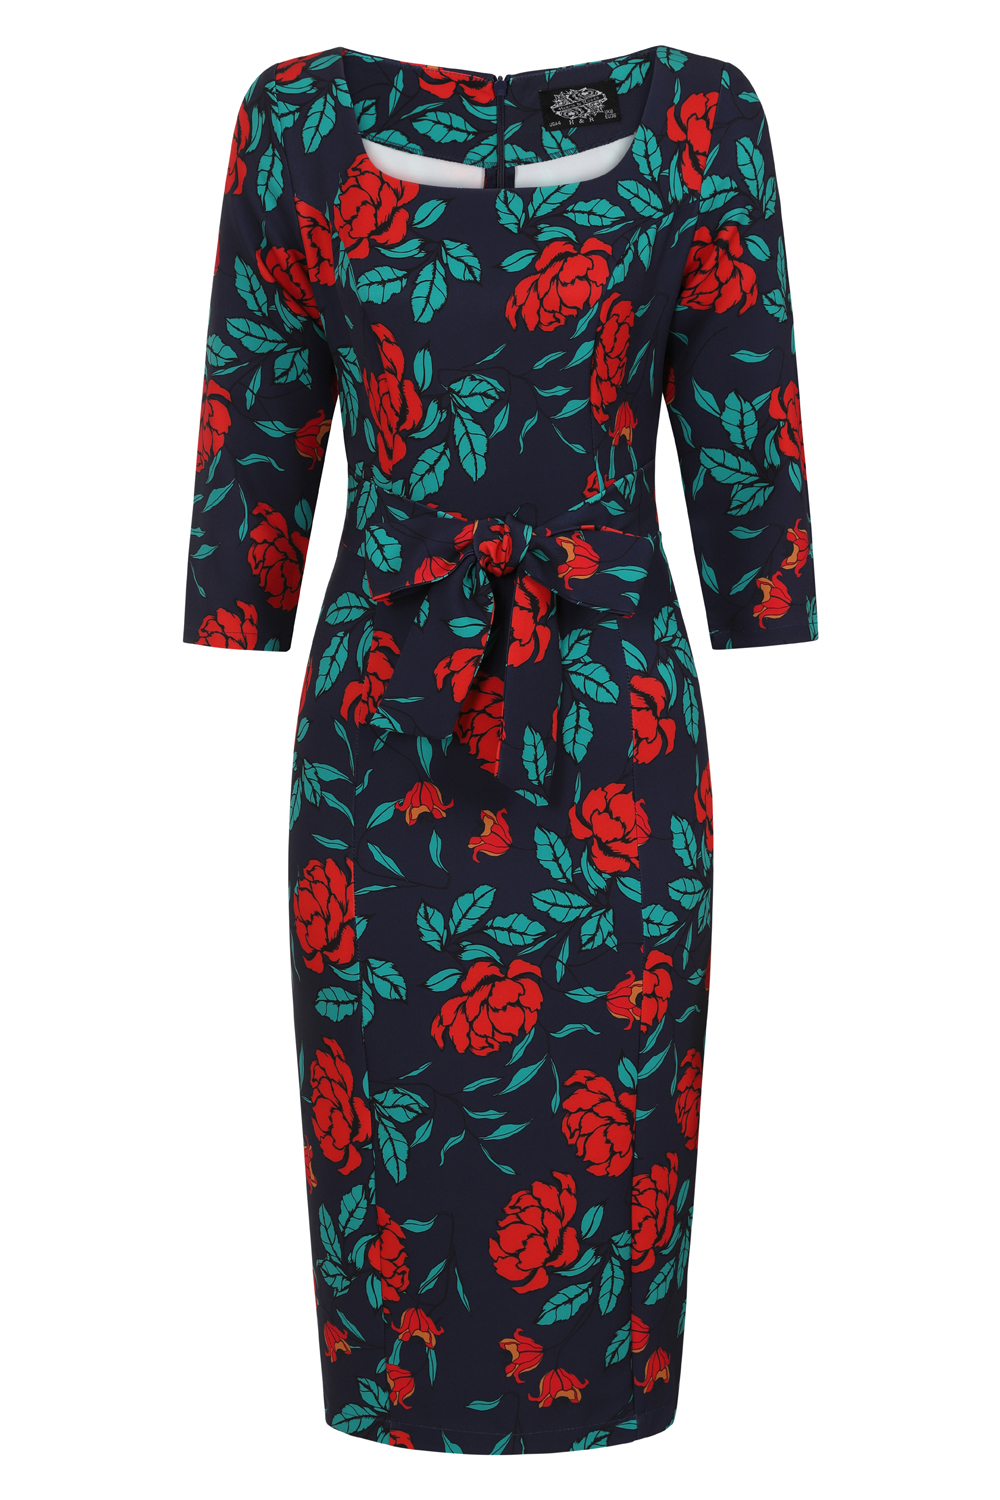 Dahlia Rose Wiggle Dress in Navy - Hearts & Roses London